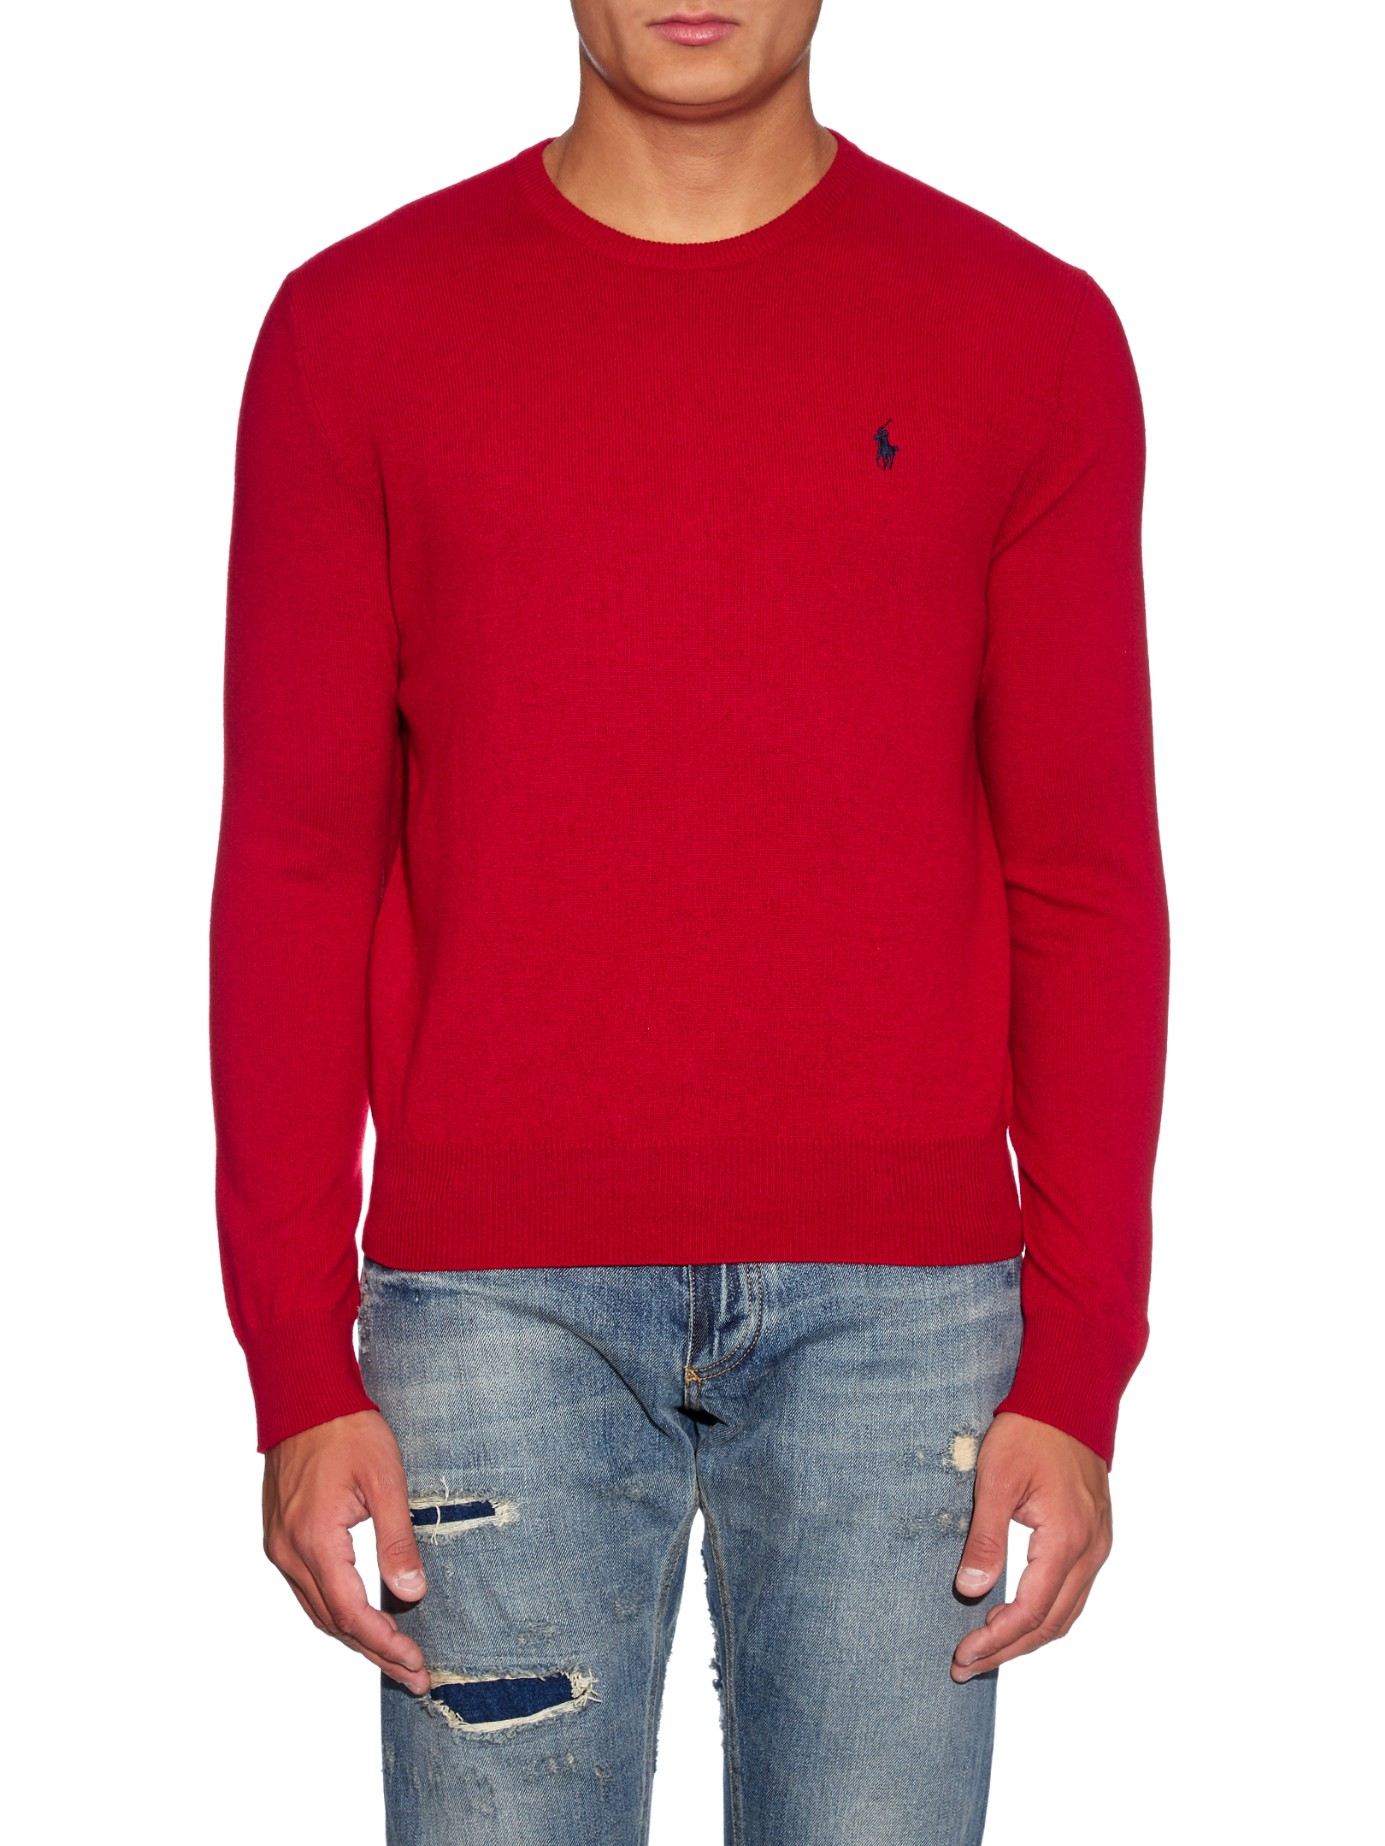 Polo Ralph Lauren Crew-neck Long-sleeved Wool Sweater in Red for Men - Lyst